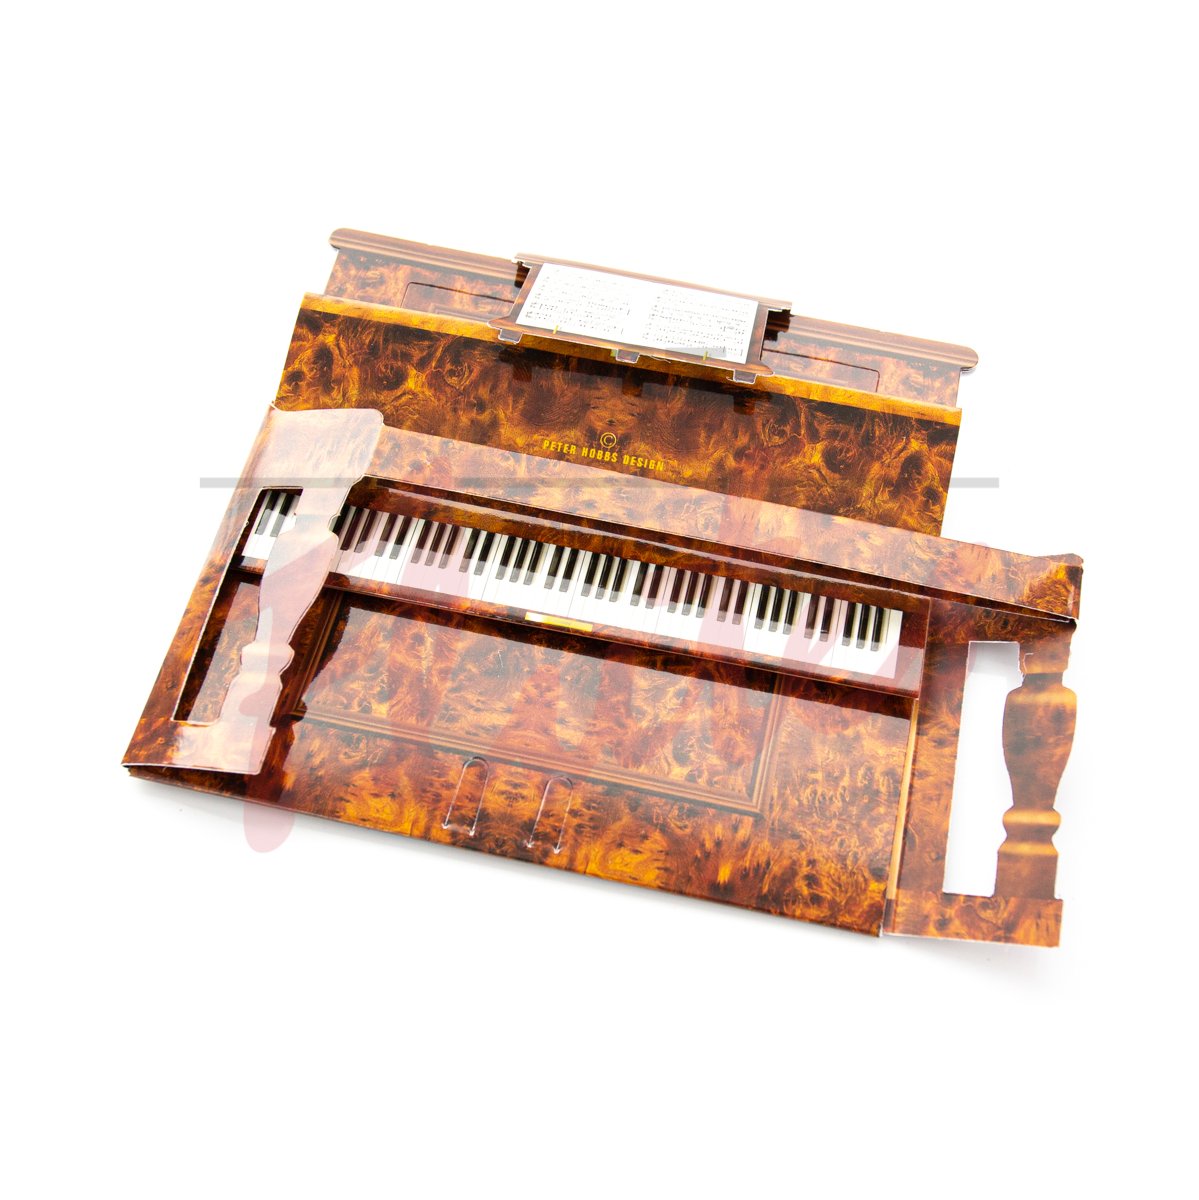 3D Upright Piano Greetings Card